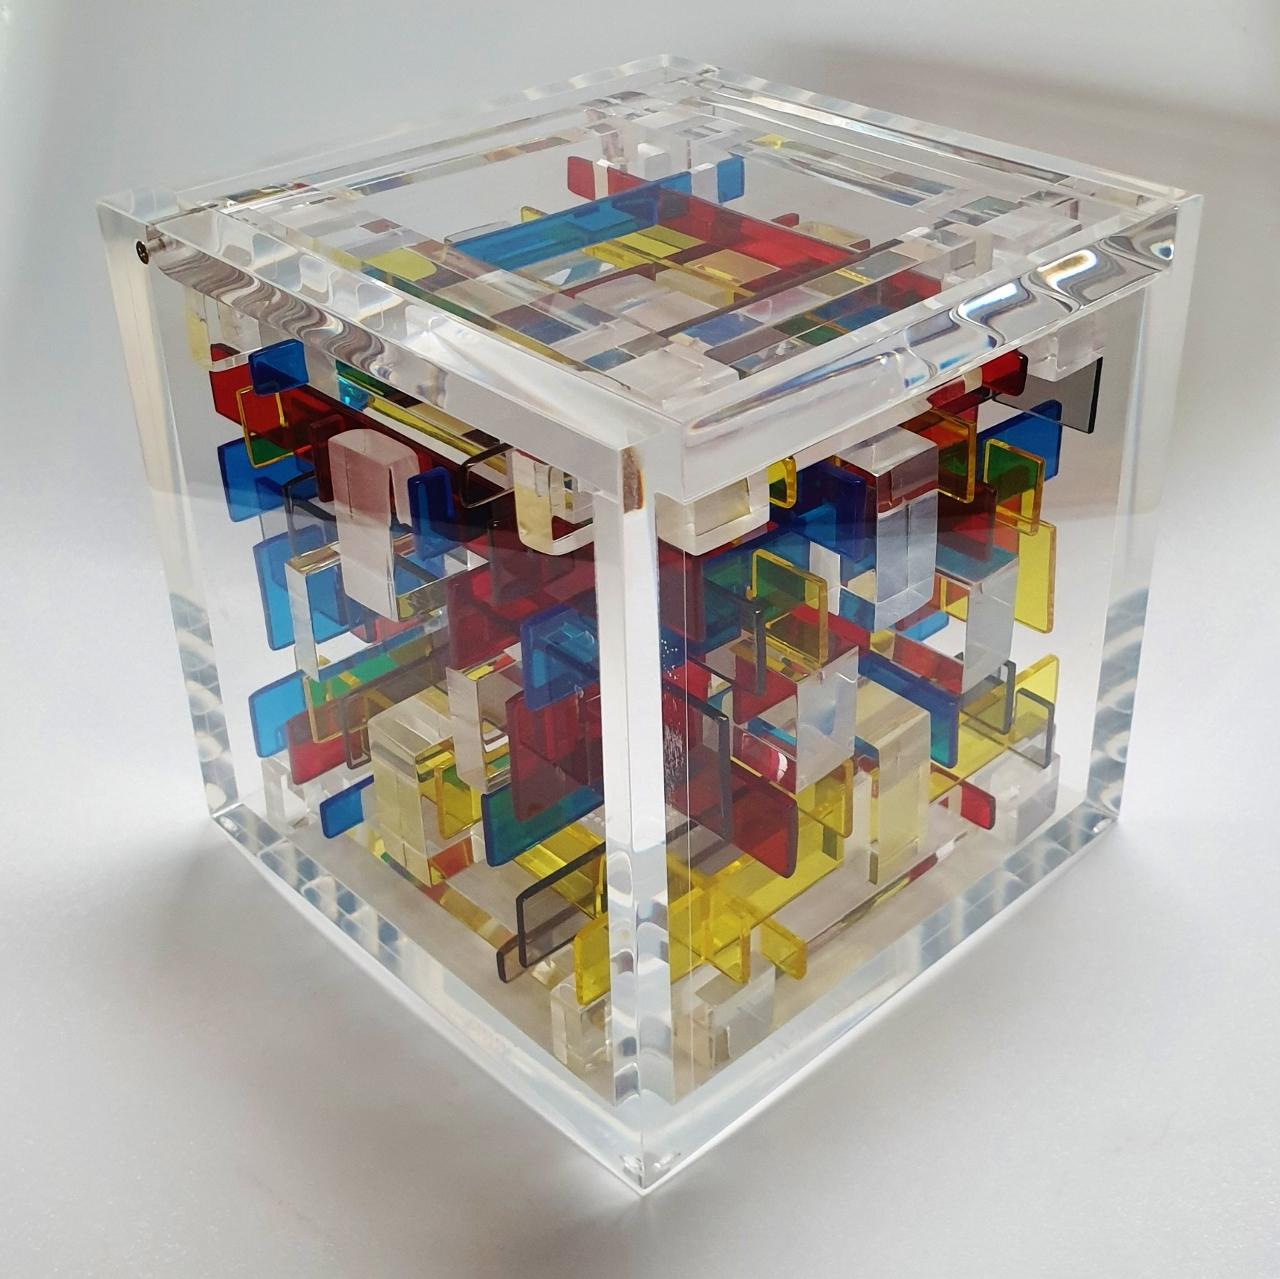 Haringa + Olijve Abstract Sculpture - Boogie-woogie - contemporary modern abstract geometric cube sculpture